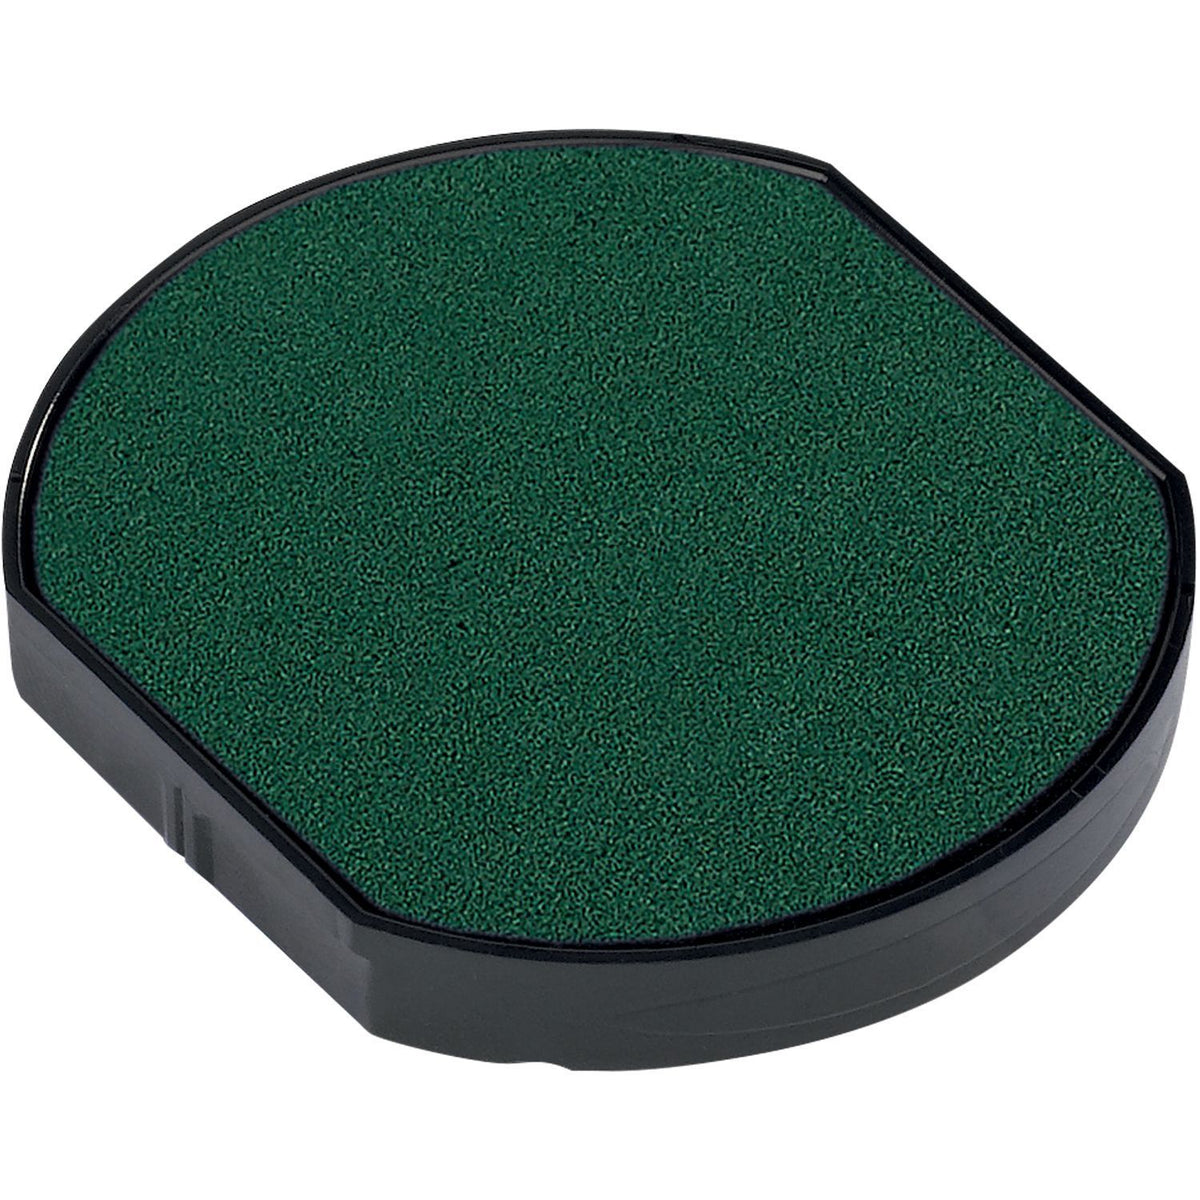 One Color Replacement Ink Pad For 46130 Trodat Green